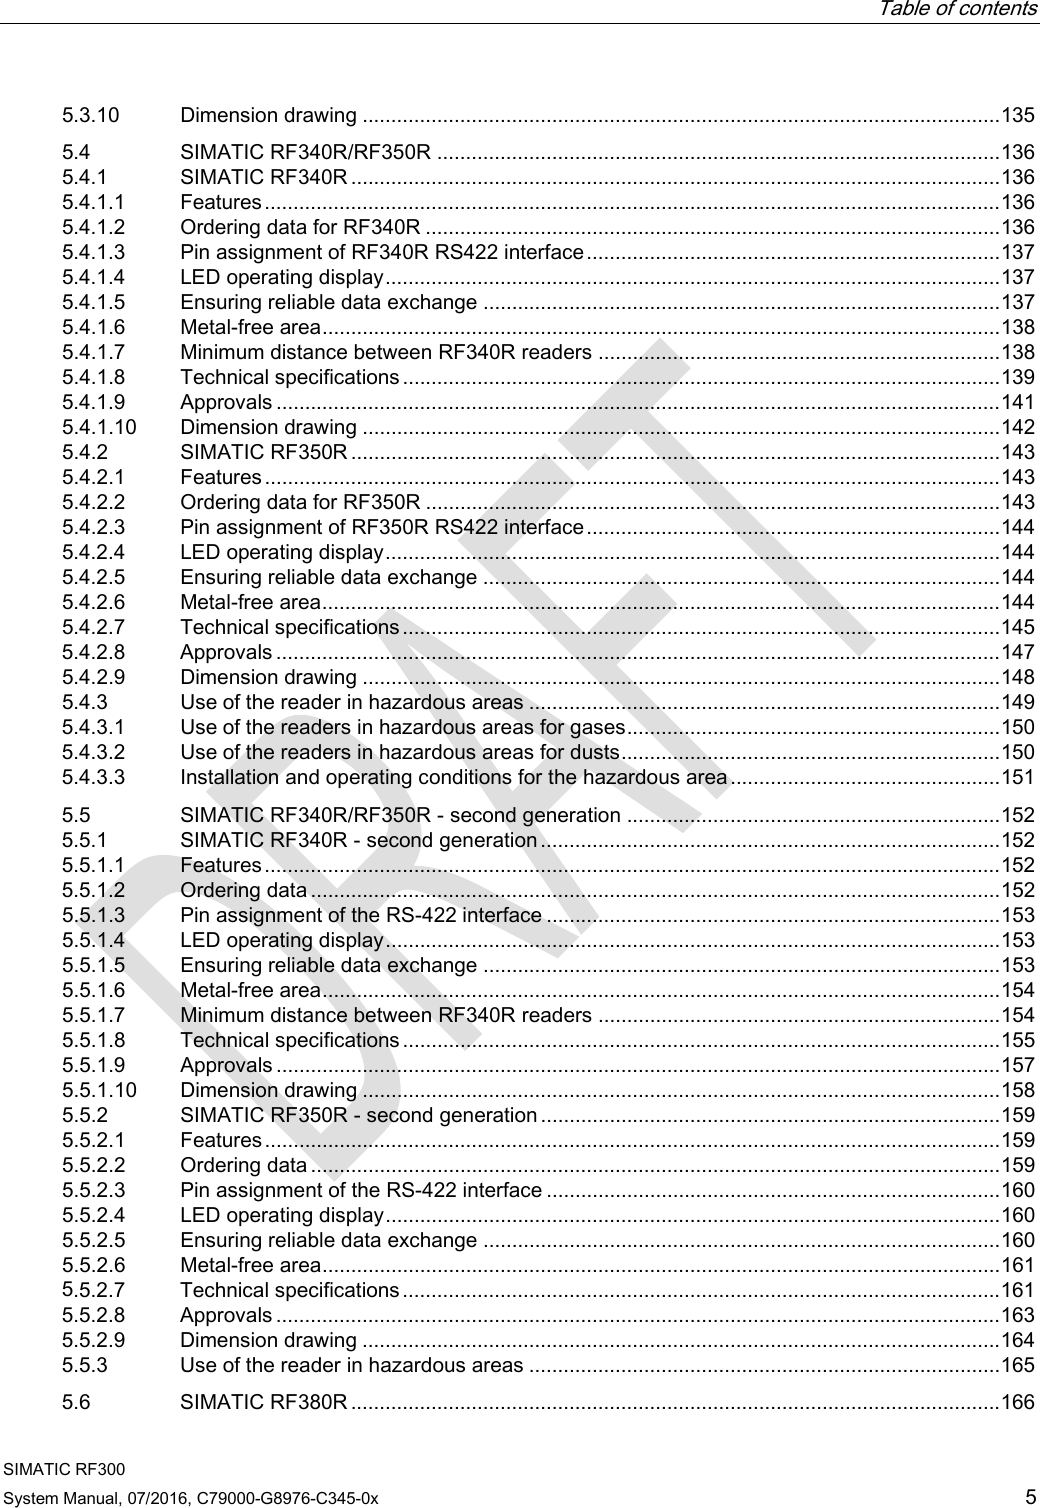  Table of contents  SIMATIC RF300 System Manual, 07/2016, C79000-G8976-C345-0x 5 5.3.10 Dimension drawing ............................................................................................................... 135 5.4 SIMATIC RF340R/RF350R .................................................................................................. 136 5.4.1 SIMATIC RF340R ................................................................................................................. 136 5.4.1.1 Features ................................................................................................................................ 136 5.4.1.2 Ordering data for RF340R .................................................................................................... 136 5.4.1.3 Pin assignment of RF340R RS422 interface ........................................................................ 137 5.4.1.4 LED operating display ........................................................................................................... 137 5.4.1.5 Ensuring reliable data exchange .......................................................................................... 137 5.4.1.6 Metal-free area ...................................................................................................................... 138 5.4.1.7 Minimum distance between RF340R readers ...................................................................... 138 5.4.1.8 Technical specifications ........................................................................................................ 139 5.4.1.9 Approvals .............................................................................................................................. 141 5.4.1.10 Dimension drawing ............................................................................................................... 142 5.4.2 SIMATIC RF350R ................................................................................................................. 143 5.4.2.1 Features ................................................................................................................................ 143 5.4.2.2 Ordering data for RF350R .................................................................................................... 143 5.4.2.3 Pin assignment of RF350R RS422 interface ........................................................................ 144 5.4.2.4 LED operating display ........................................................................................................... 144 5.4.2.5 Ensuring reliable data exchange .......................................................................................... 144 5.4.2.6 Metal-free area ...................................................................................................................... 144 5.4.2.7 Technical specifications ........................................................................................................ 145 5.4.2.8 Approvals .............................................................................................................................. 147 5.4.2.9 Dimension drawing ............................................................................................................... 148 5.4.3 Use of the reader in hazardous areas .................................................................................. 149 5.4.3.1 Use of the readers in hazardous areas for gases ................................................................. 150 5.4.3.2 Use of the readers in hazardous areas for dusts .................................................................. 150 5.4.3.3 Installation and operating conditions for the hazardous area ............................................... 151 5.5 SIMATIC RF340R/RF350R - second generation ................................................................. 152 5.5.1 SIMATIC RF340R - second generation ................................................................................ 152 5.5.1.1 Features ................................................................................................................................ 152 5.5.1.2 Ordering data ........................................................................................................................ 152 5.5.1.3 Pin assignment of the RS-422 interface ............................................................................... 153 5.5.1.4 LED operating display ........................................................................................................... 153 5.5.1.5 Ensuring reliable data exchange .......................................................................................... 153 5.5.1.6 Metal-free area ...................................................................................................................... 154 5.5.1.7 Minimum distance between RF340R readers ...................................................................... 154 5.5.1.8 Technical specifications ........................................................................................................ 155 5.5.1.9 Approvals .............................................................................................................................. 157 5.5.1.10 Dimension drawing ............................................................................................................... 158 5.5.2 SIMATIC RF350R - second generation ................................................................................ 159 5.5.2.1 Features ................................................................................................................................ 159 5.5.2.2 Ordering data ........................................................................................................................ 159 5.5.2.3 Pin assignment of the RS-422 interface ............................................................................... 160 5.5.2.4 LED operating display ........................................................................................................... 160 5.5.2.5 Ensuring reliable data exchange .......................................................................................... 160 5.5.2.6 Metal-free area ...................................................................................................................... 161 5.5.2.7 Technical specifications ........................................................................................................ 161 5.5.2.8 Approvals .............................................................................................................................. 163 5.5.2.9 Dimension drawing ............................................................................................................... 164 5.5.3 Use of the reader in hazardous areas .................................................................................. 165 5.6 SIMATIC RF380R ................................................................................................................. 166 